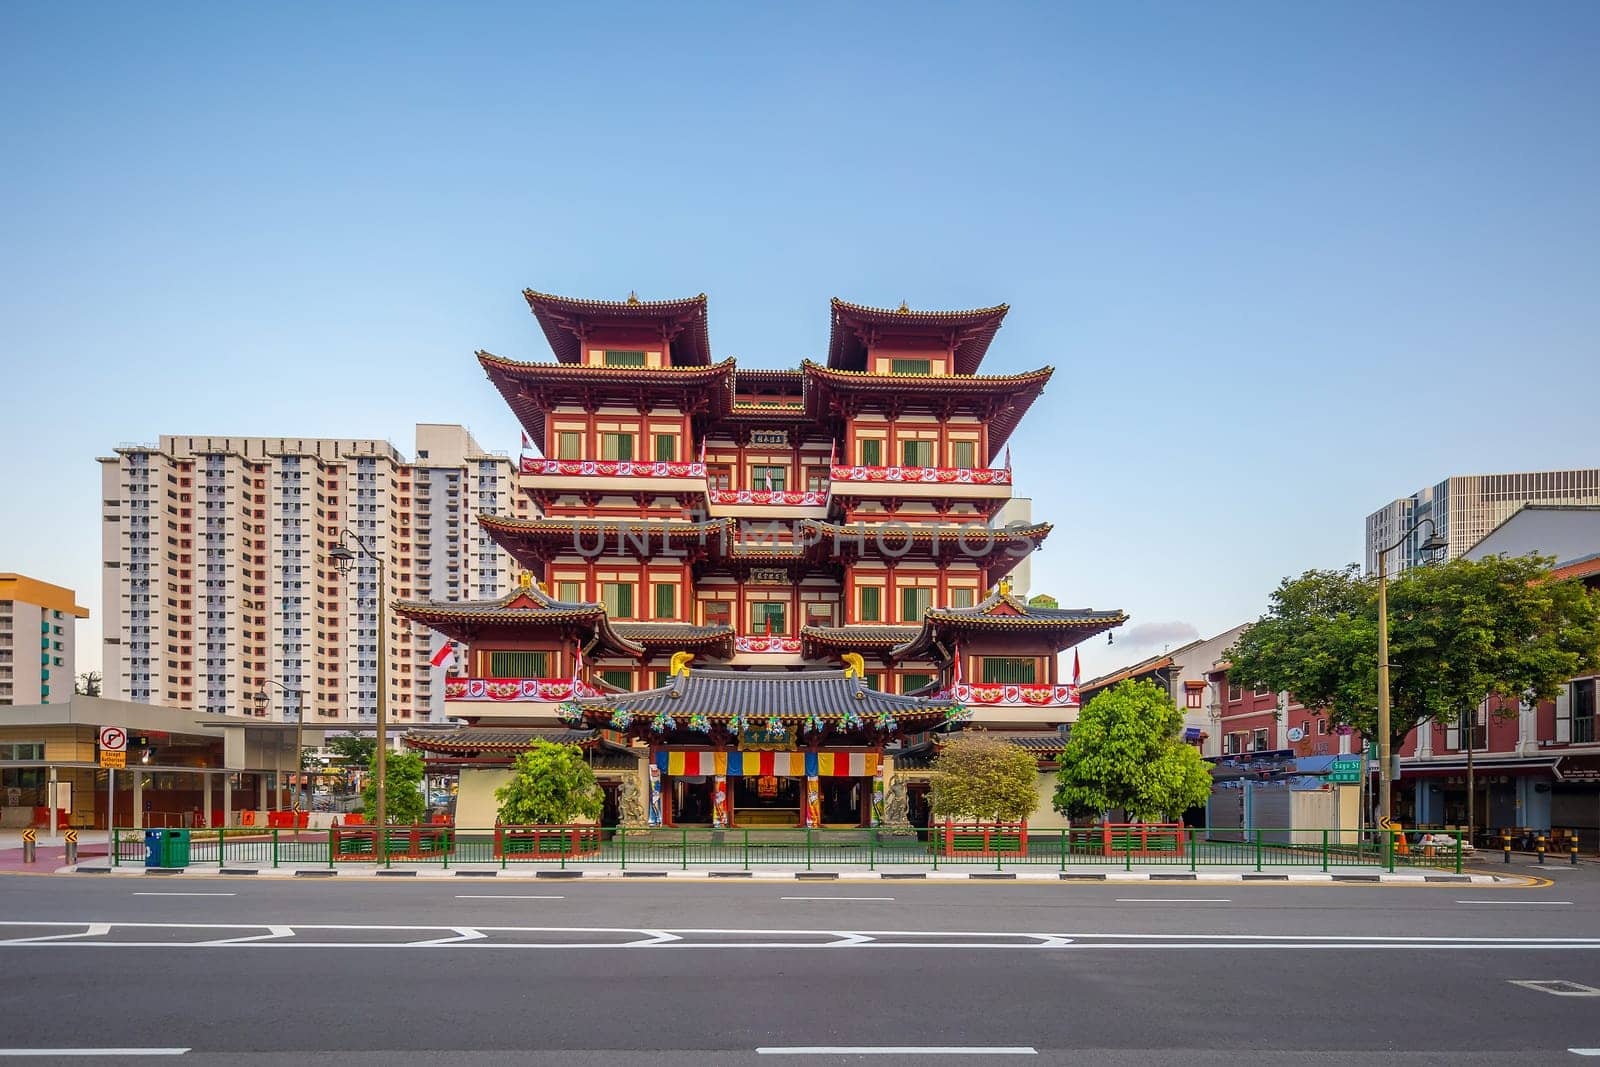 The Buddha Toothe Relic Temple at Chinatown in Singapore 